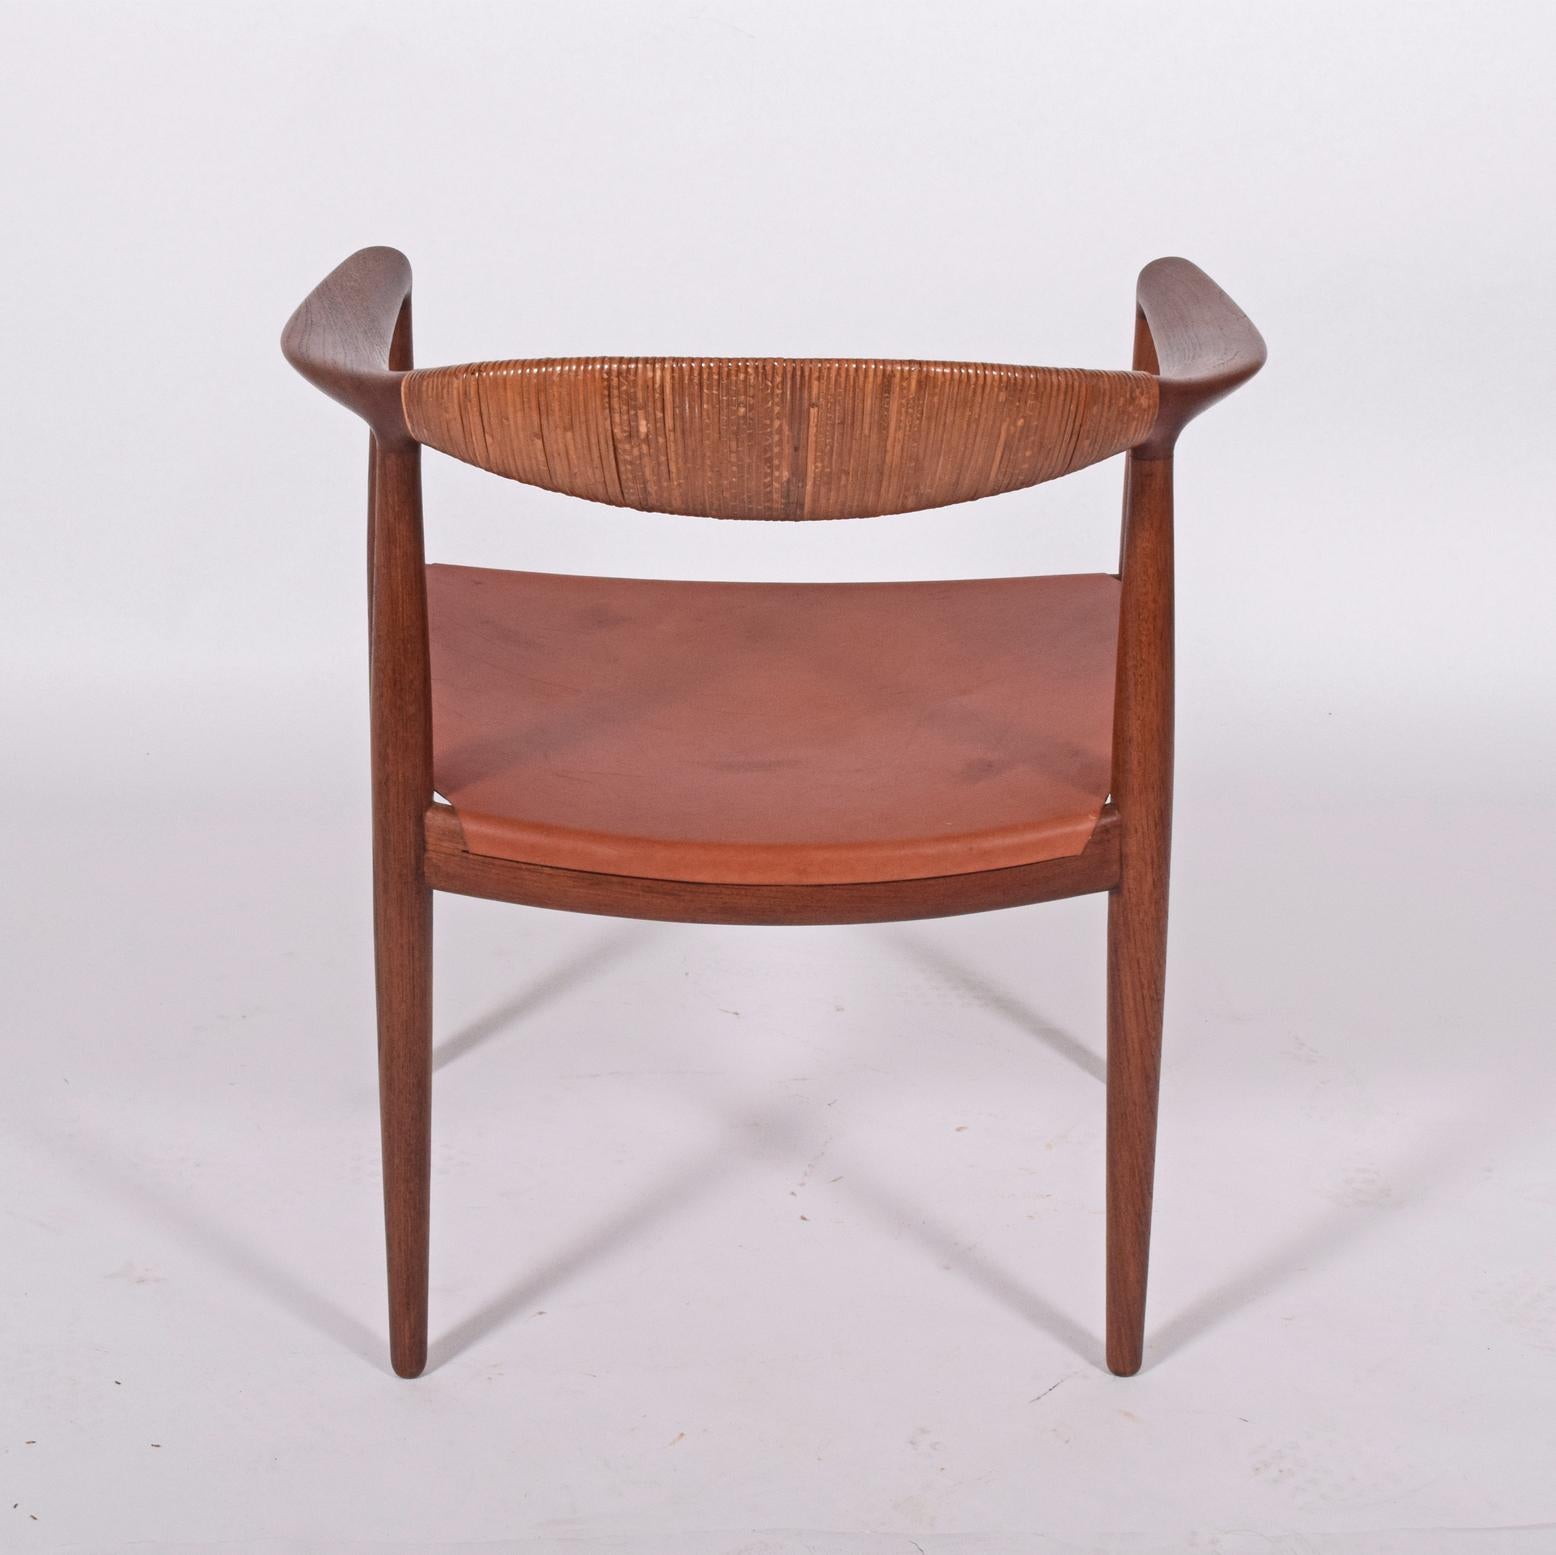 Solid teak early Hans Wegner 501 armchair with cane back leather seat instead cane impressed mark on the stretcher.